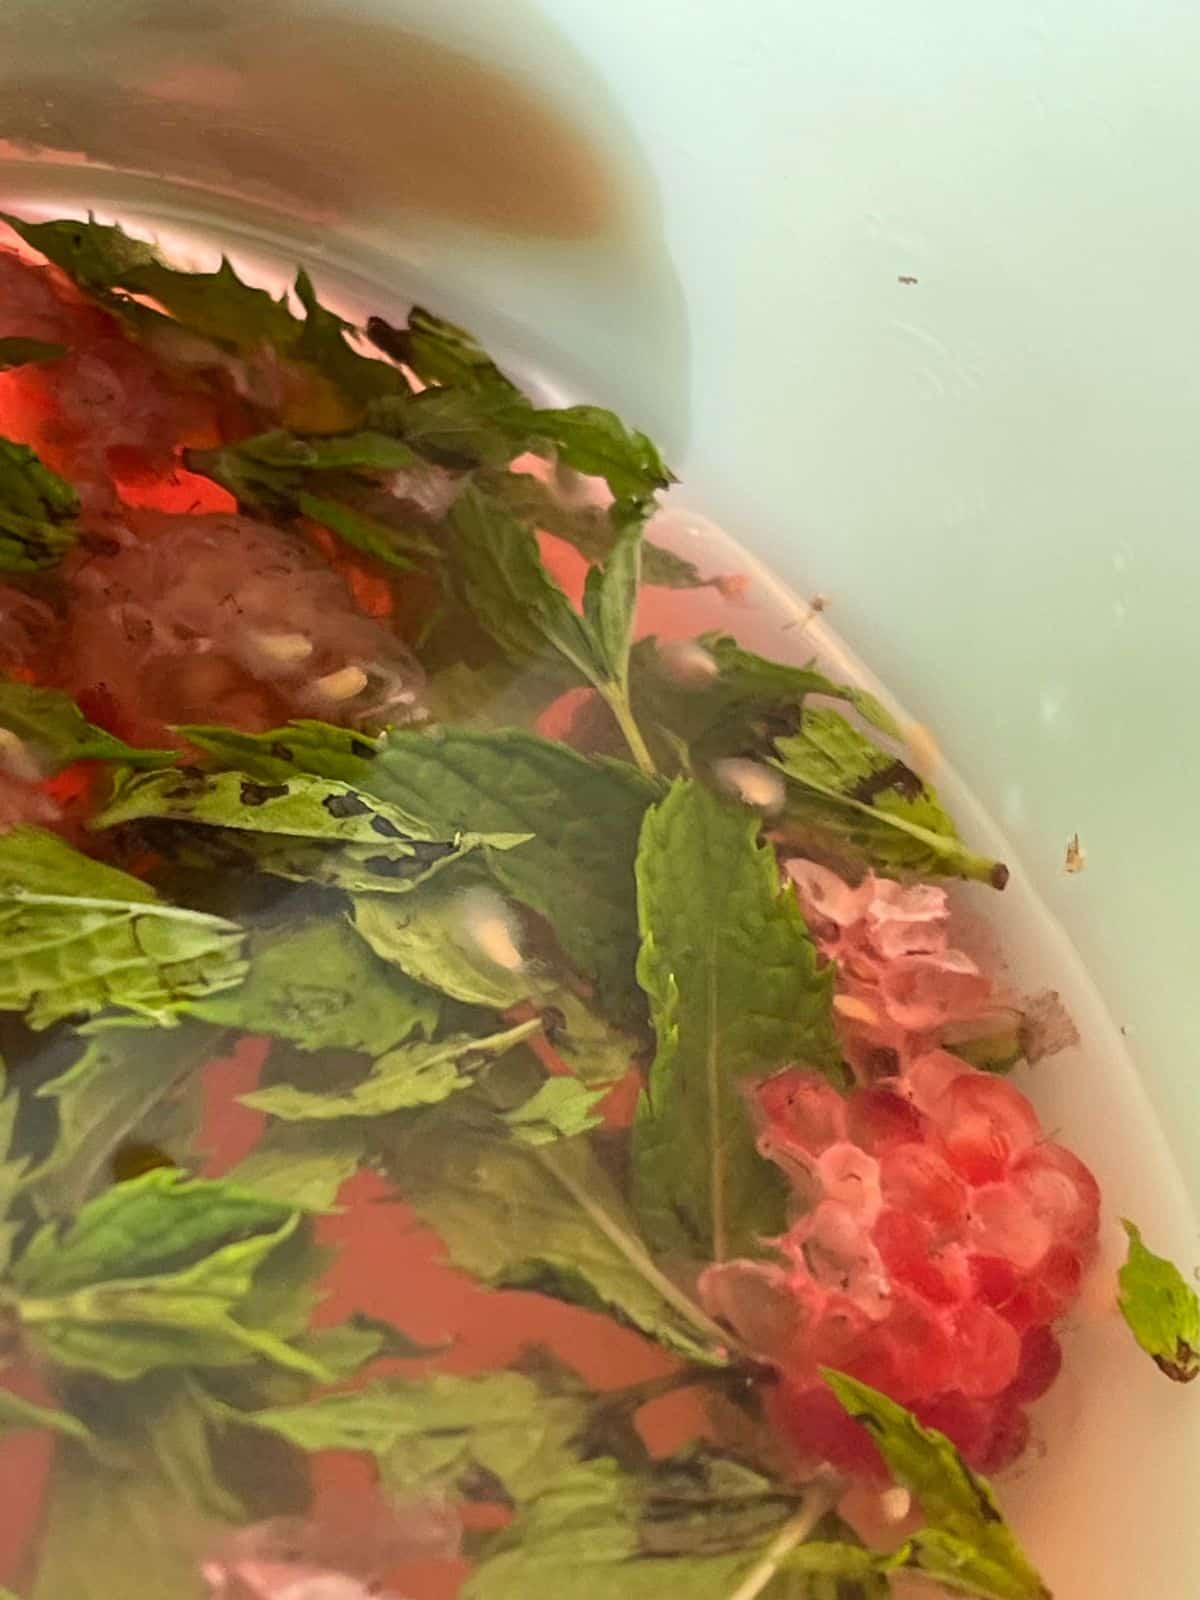 Water infused with mint and raspberries